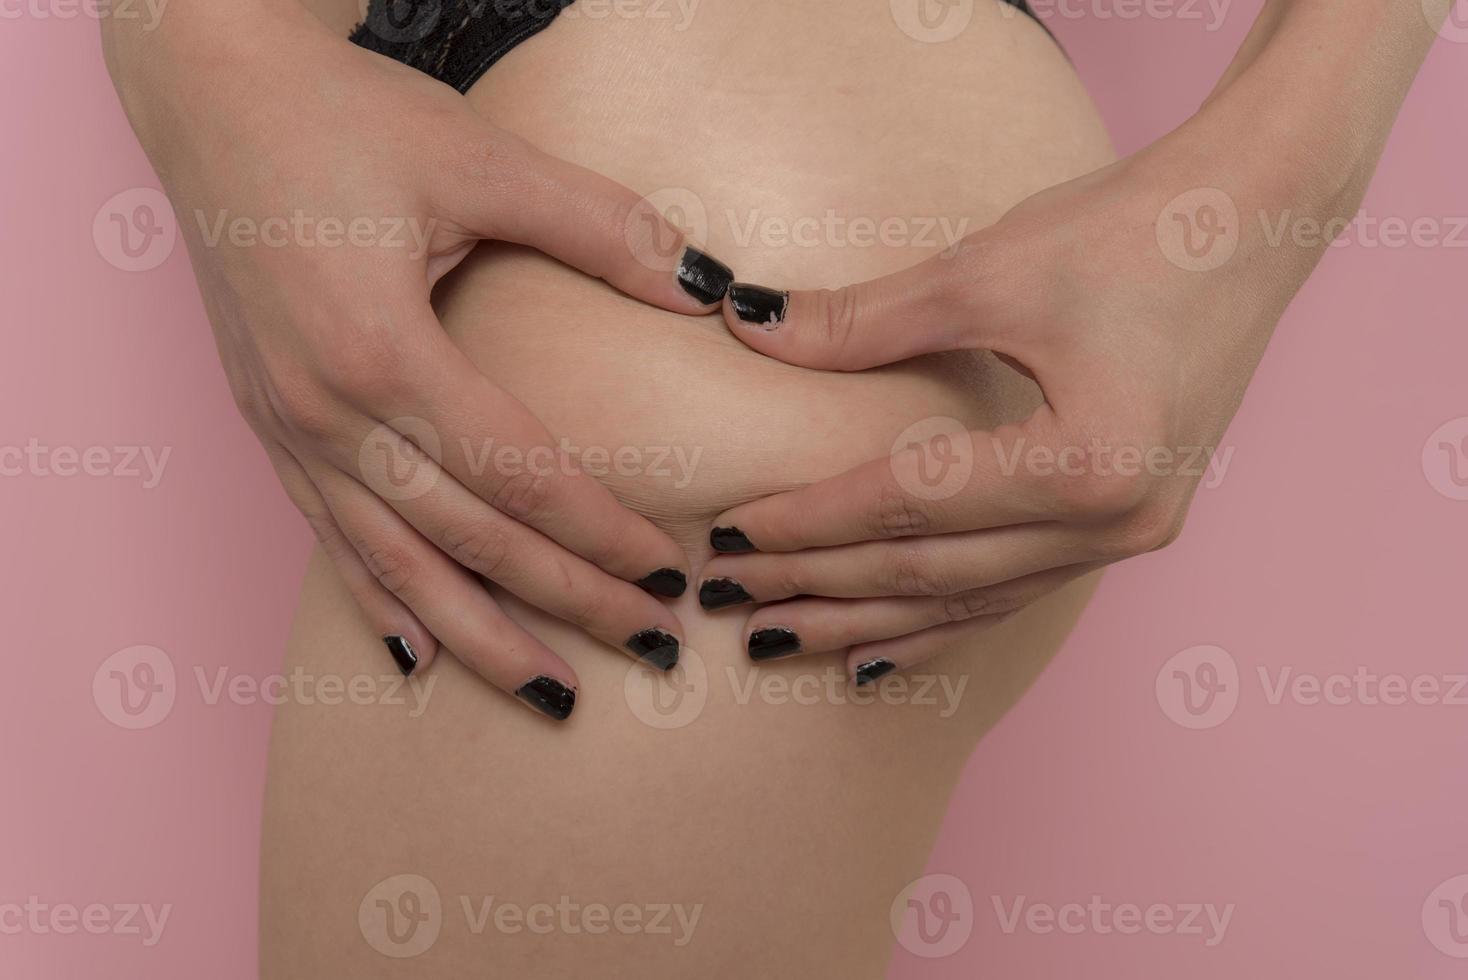 young woman checking her cellulite on her buttocks photo